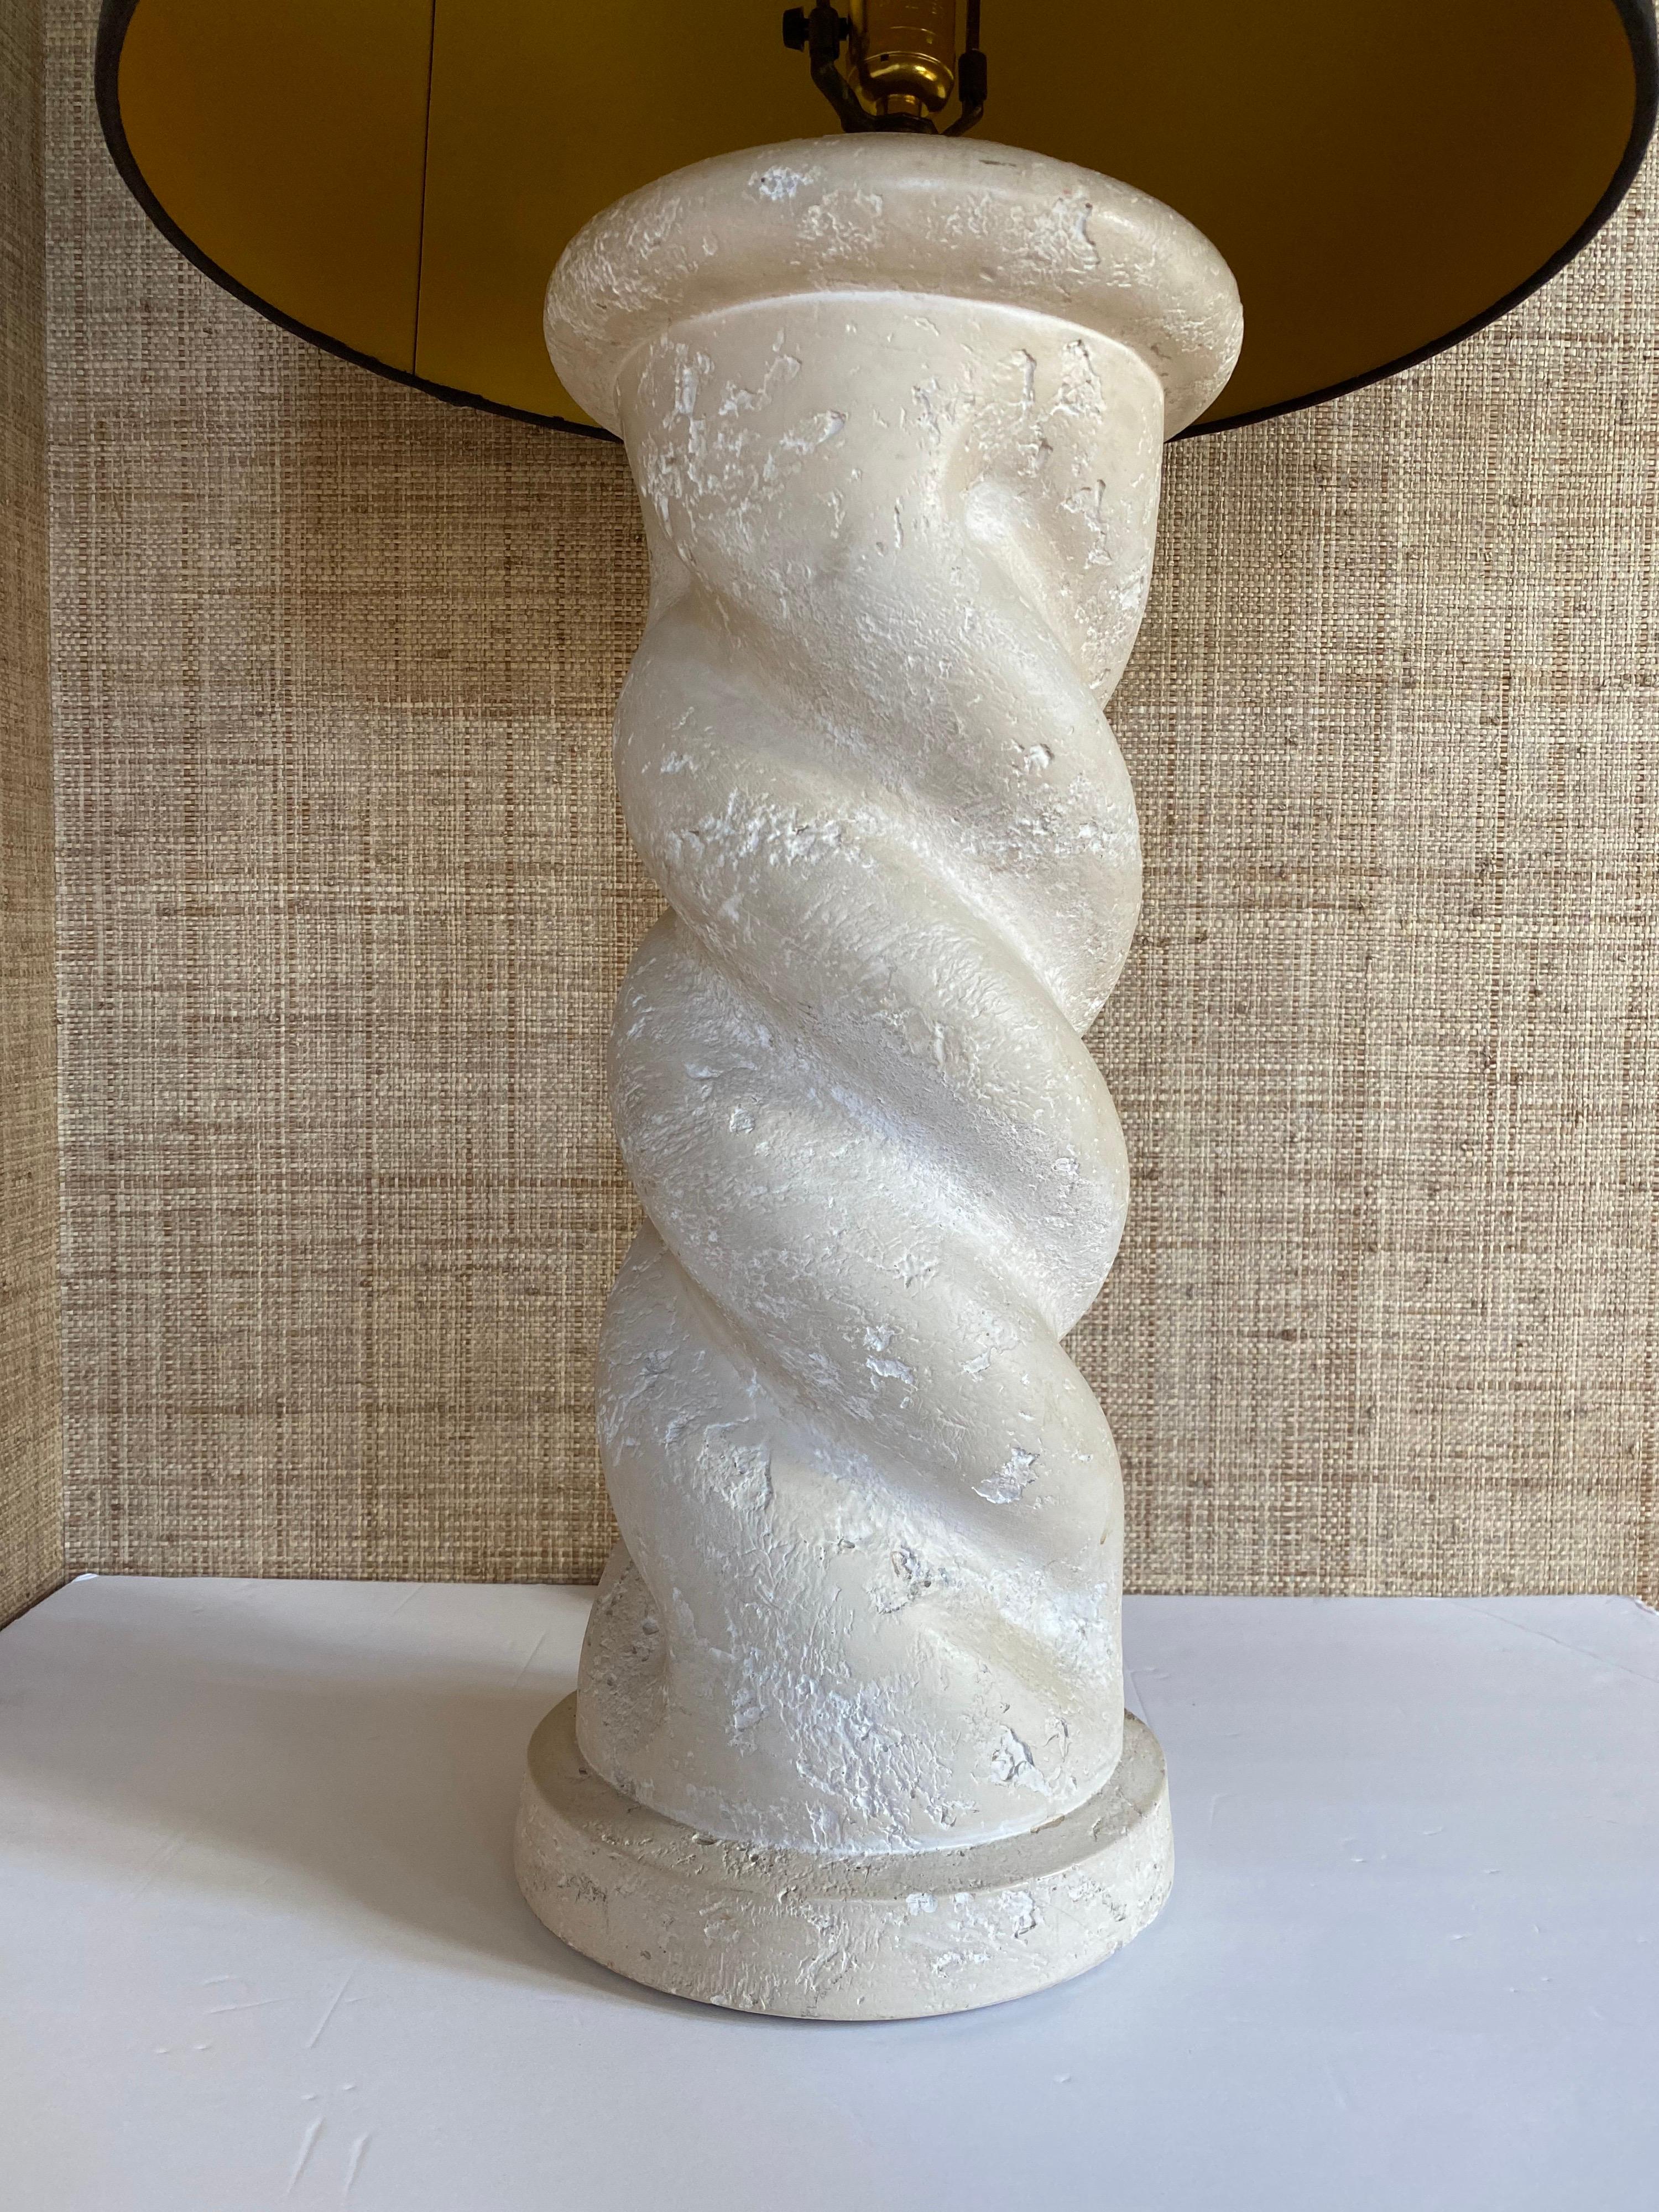 Chunky and substantial Michael Taylor style twisted spiral table lamp, circa 1980's. This architectural column form lamp features a textural warm matte white/cream plaster finish. Lamp shade not included.

Measures: Height to finial: 32 inches.